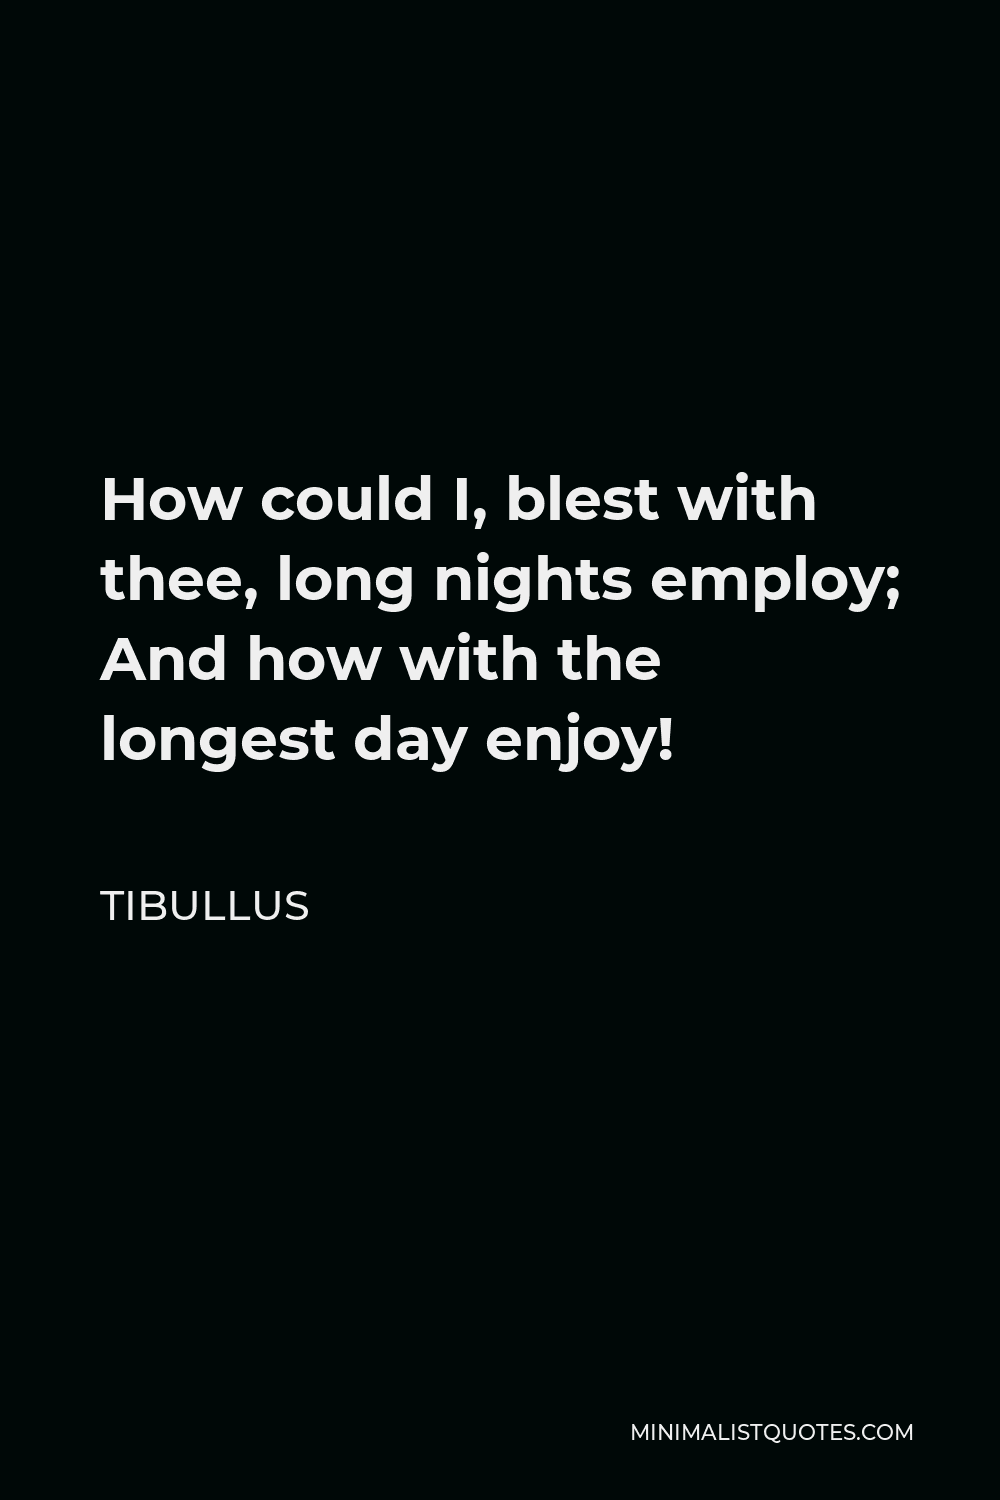 Tibullus Quote - How could I, blest with thee, long nights employ; And how with the longest day enjoy!